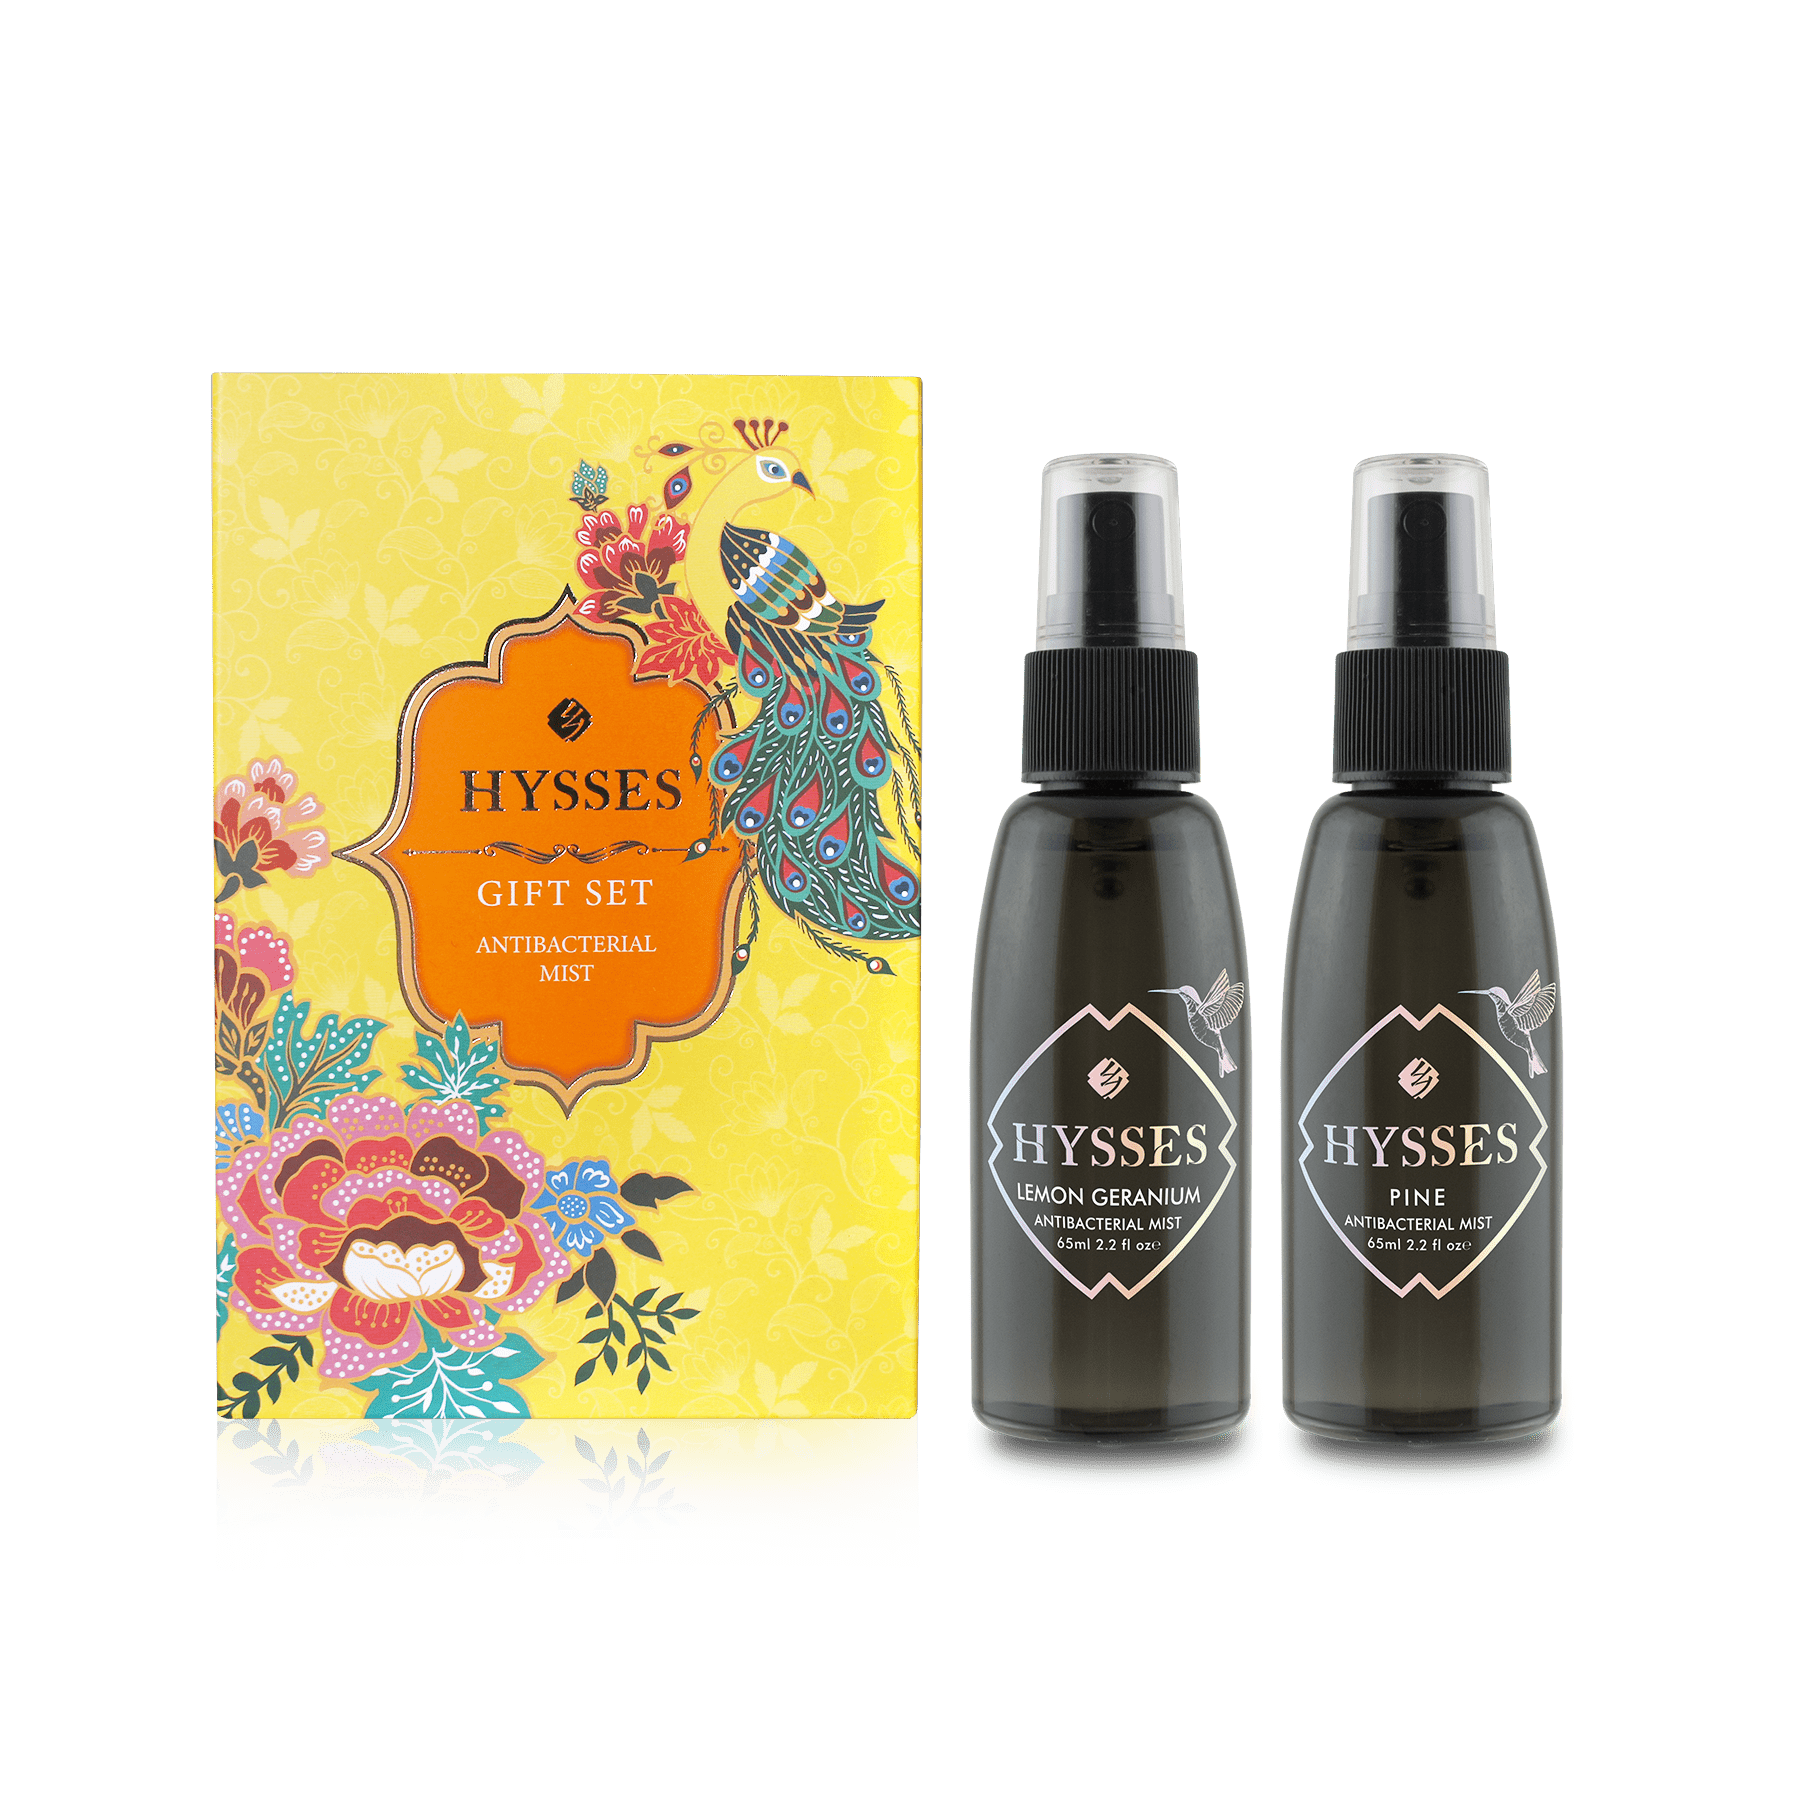 Hysses Face Care Antibacterial Mist Gift Set